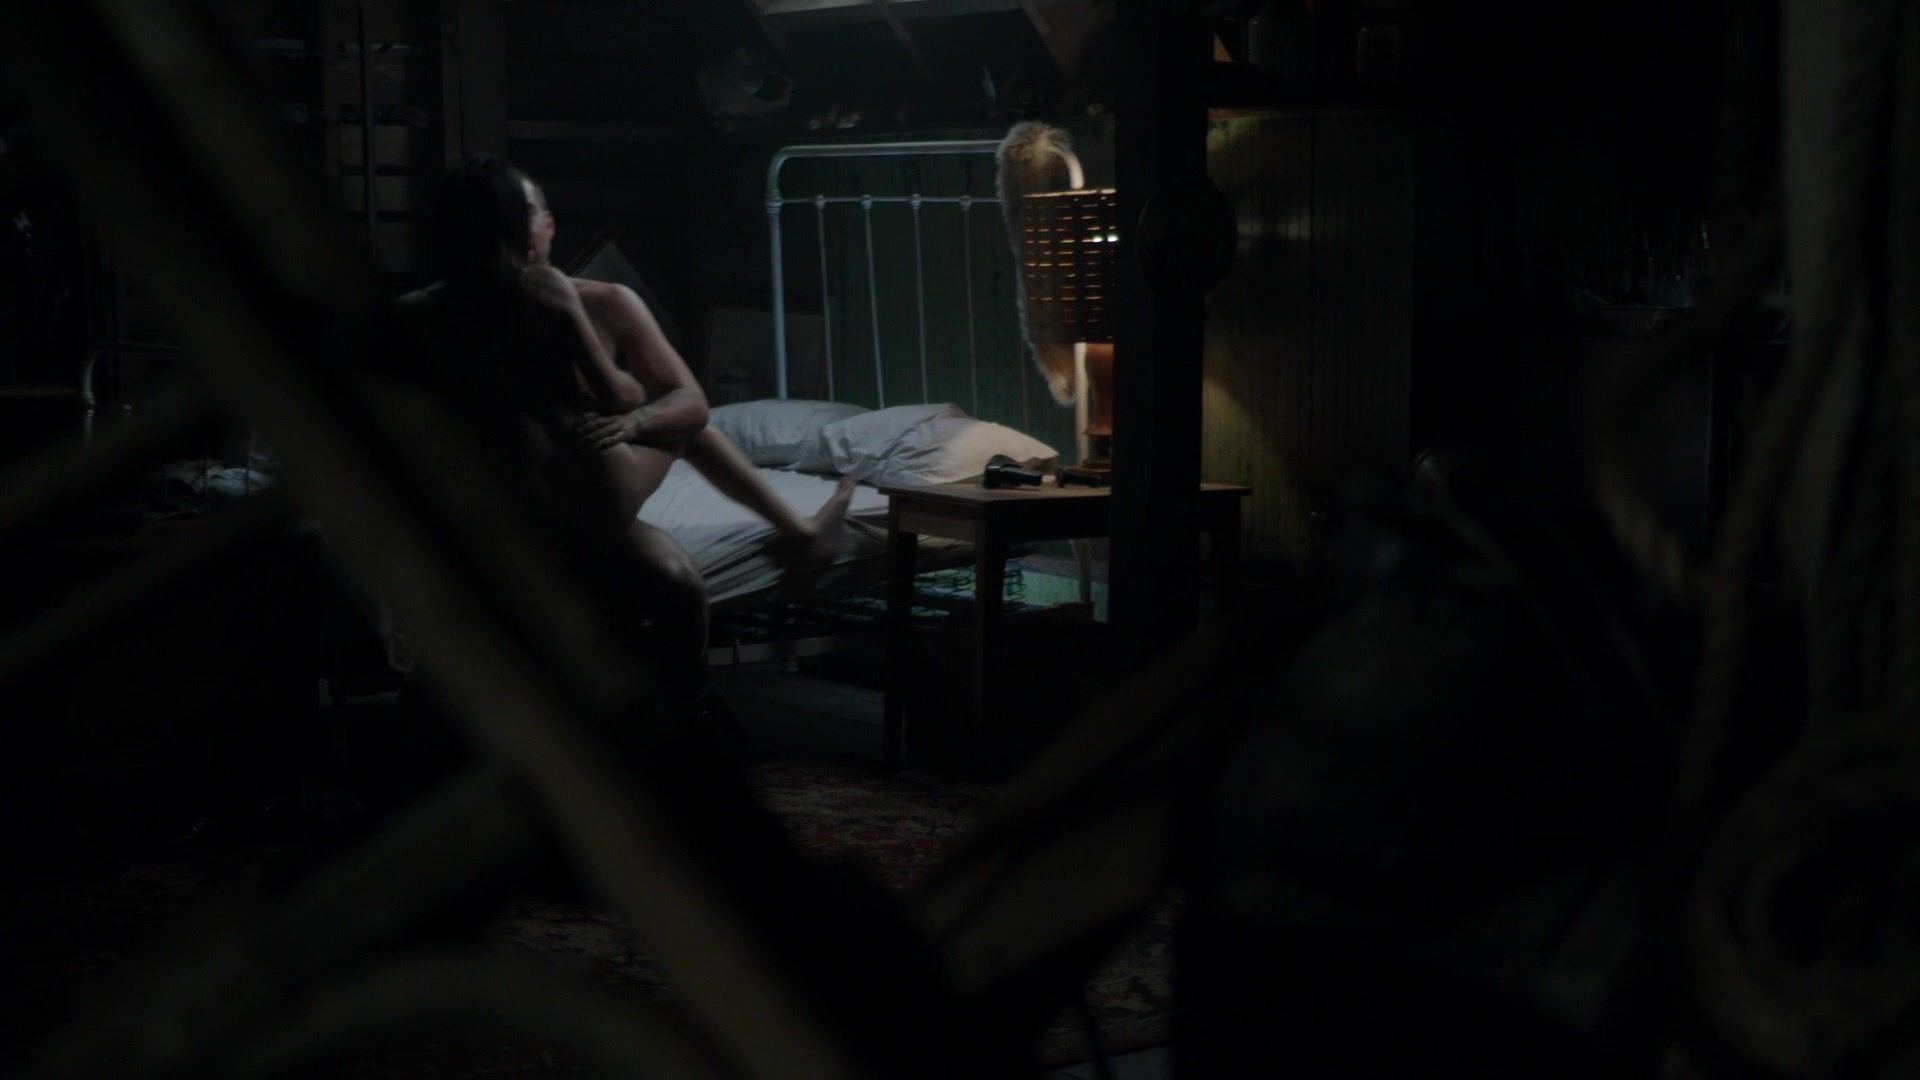 Pounding Odette Annable - Banshee s02e01-02 (2014) Big breasts